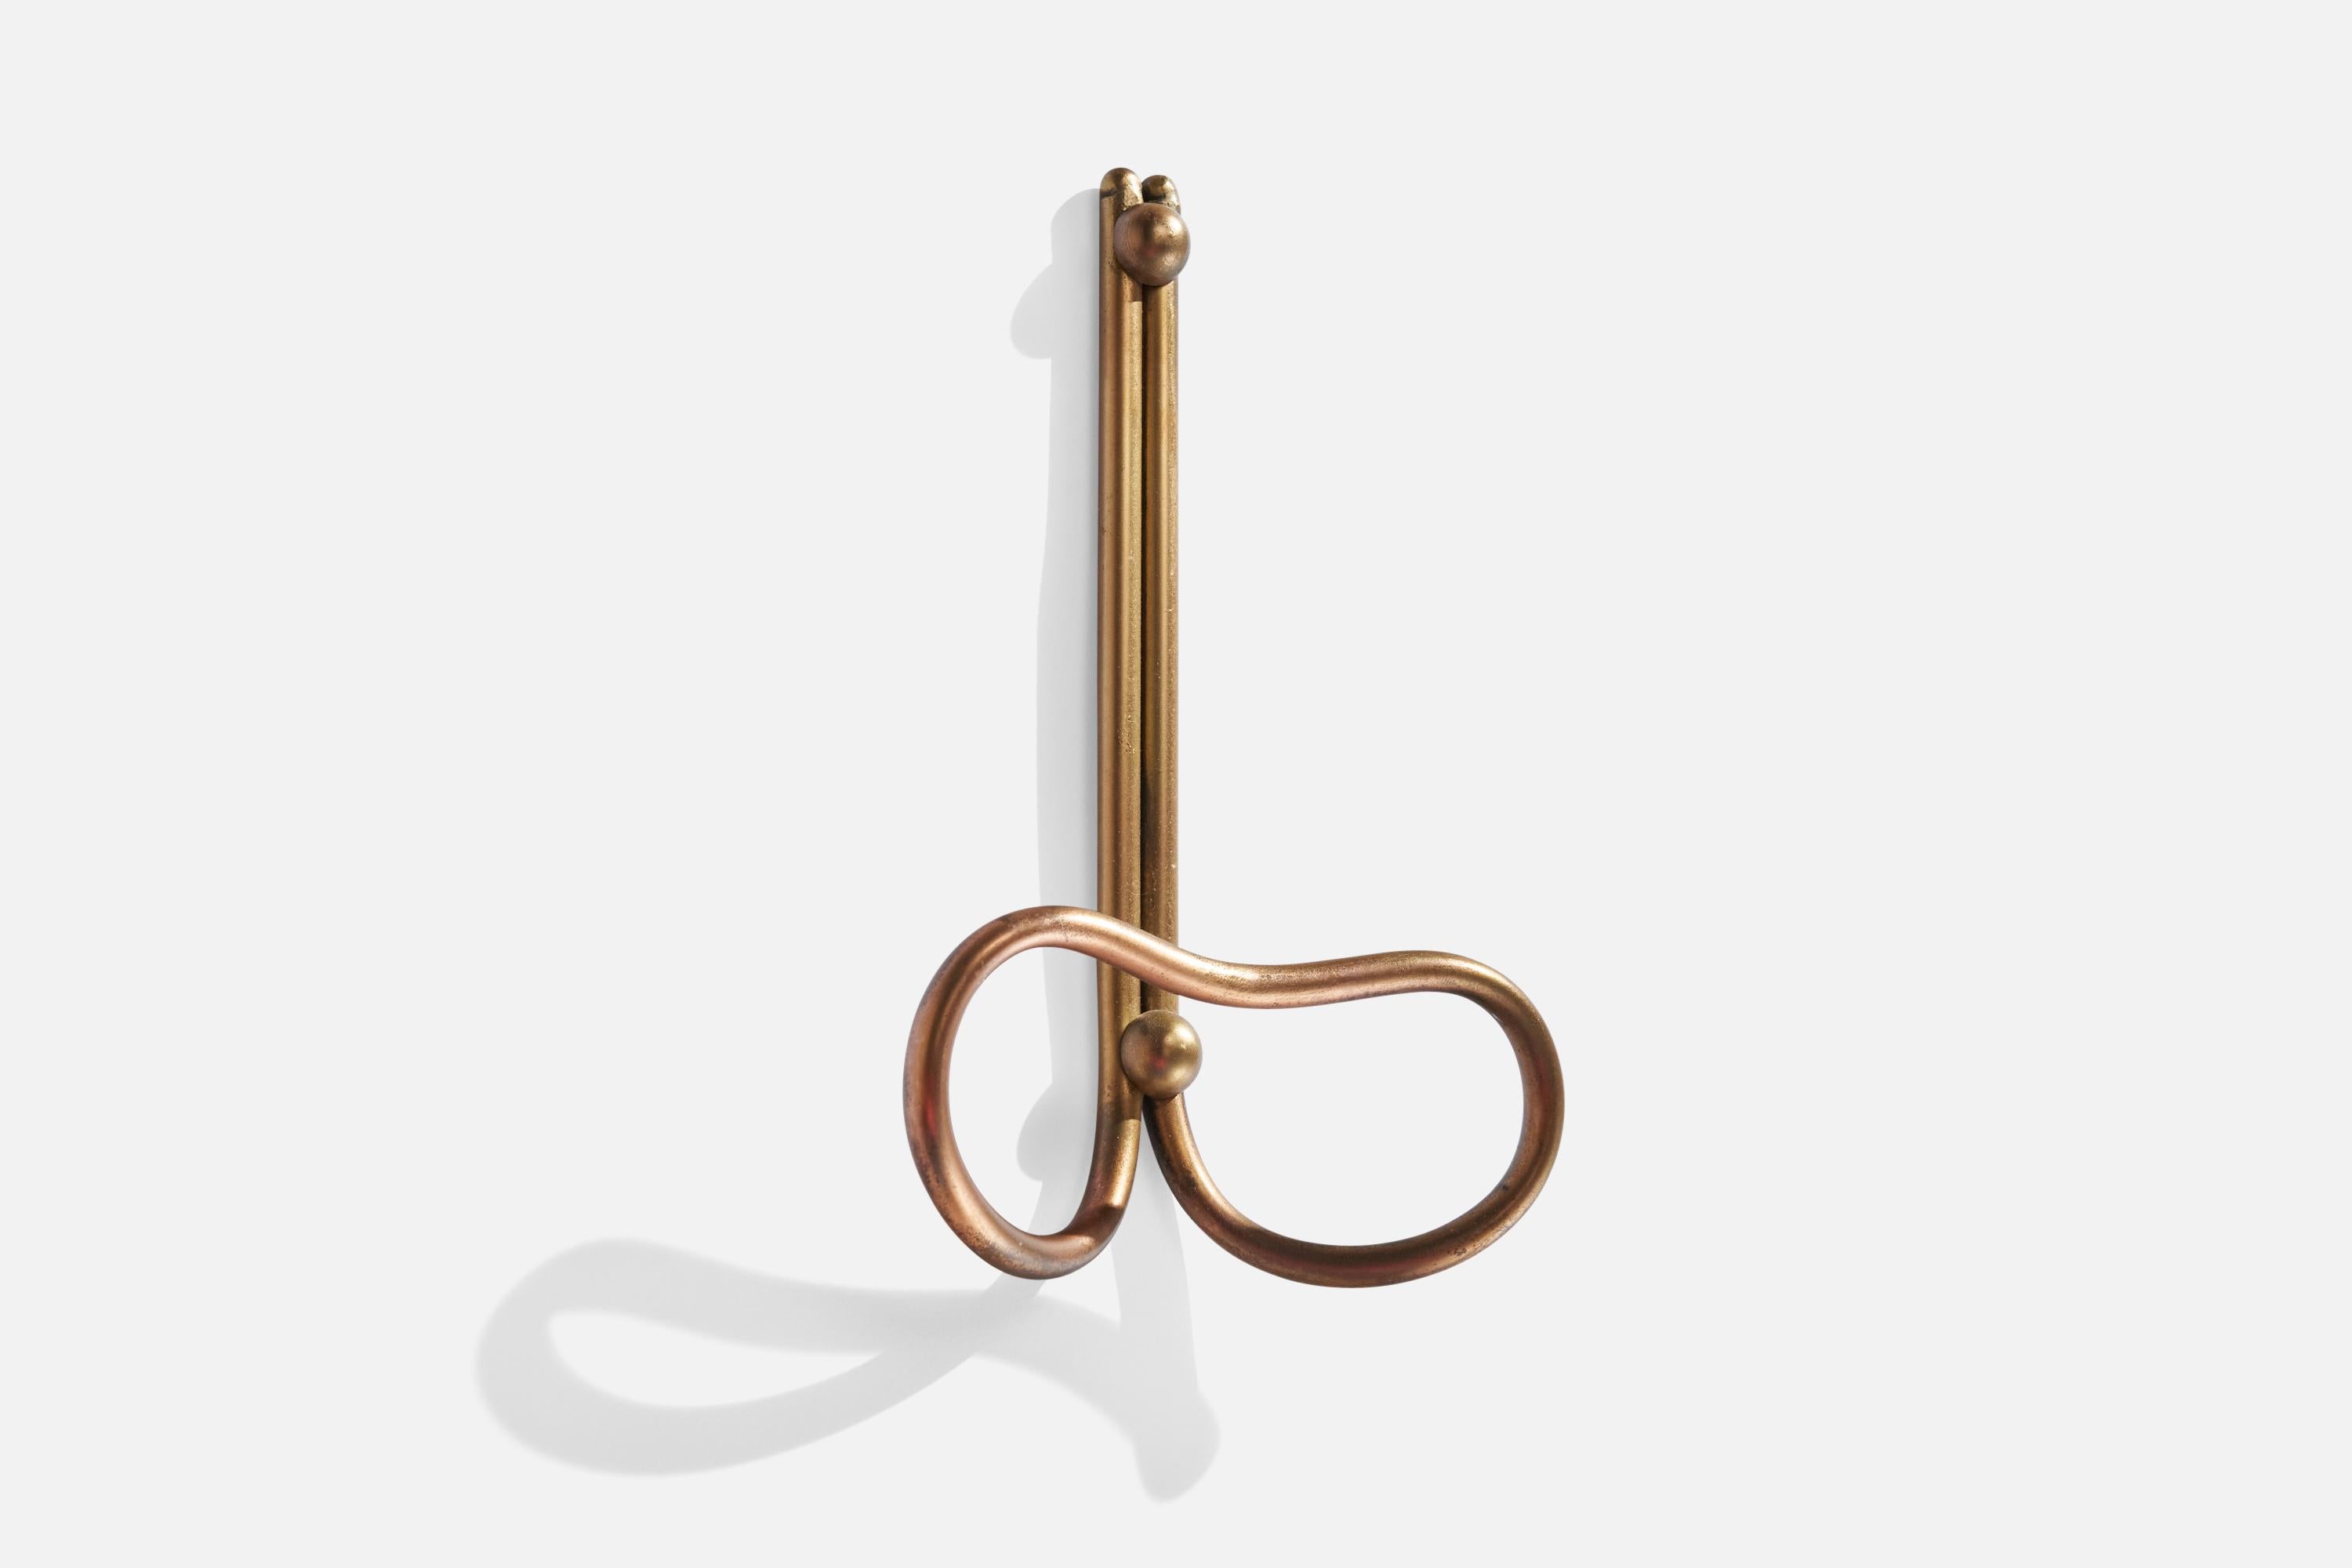 A pair brass coat hanger designed and produced in Italy, 1940s